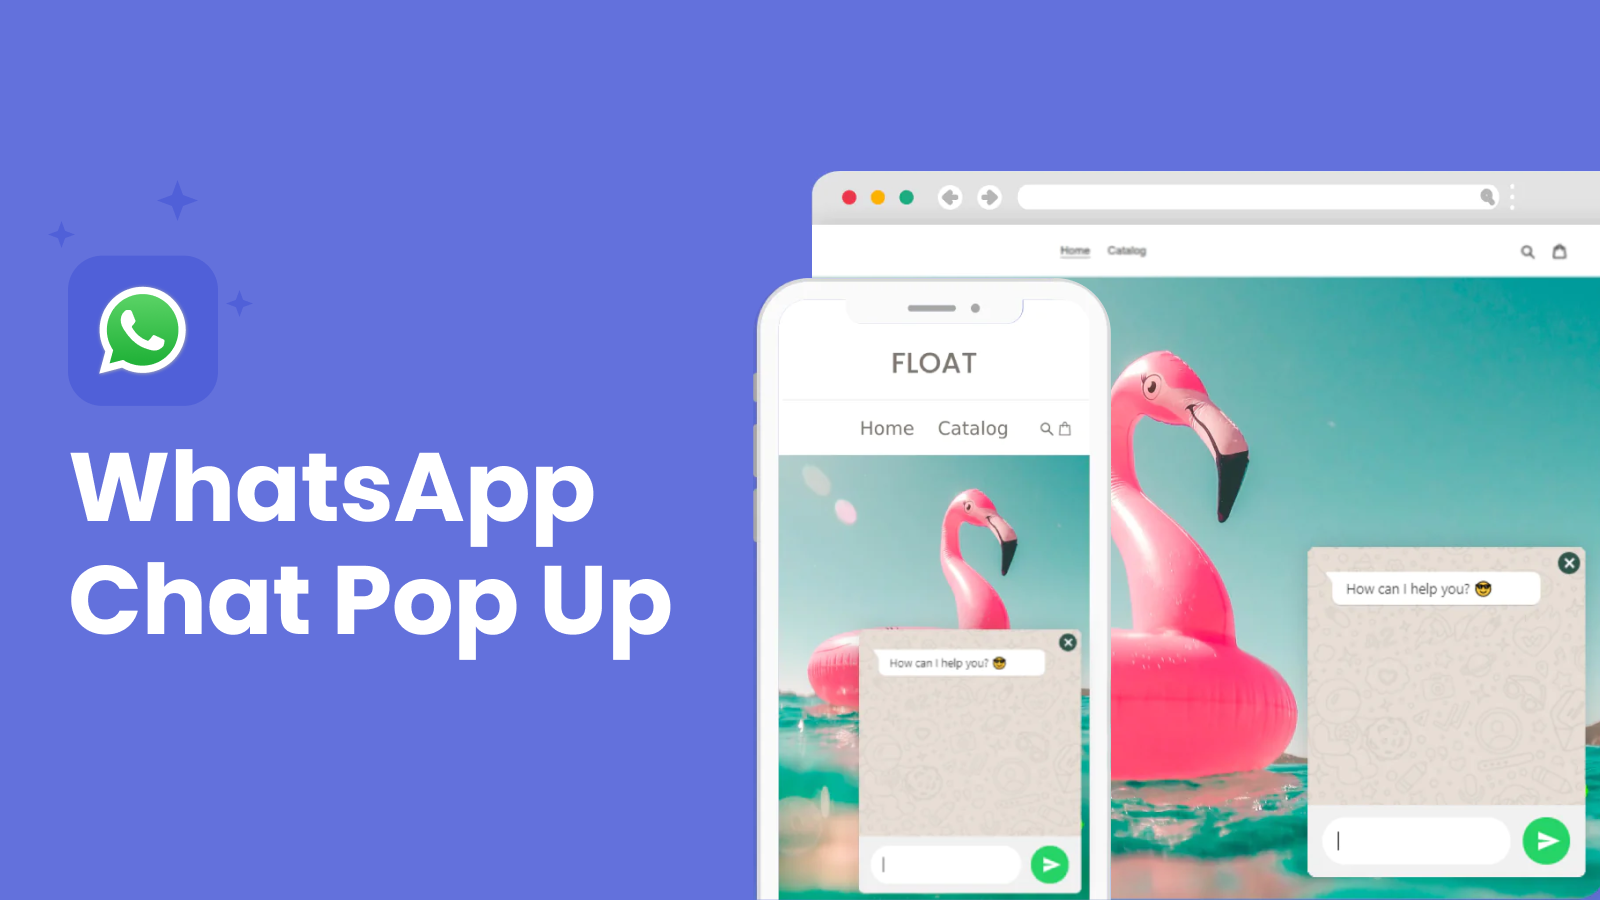 Create a WhatsApp pop up & chat with your visitors on WhatsApp